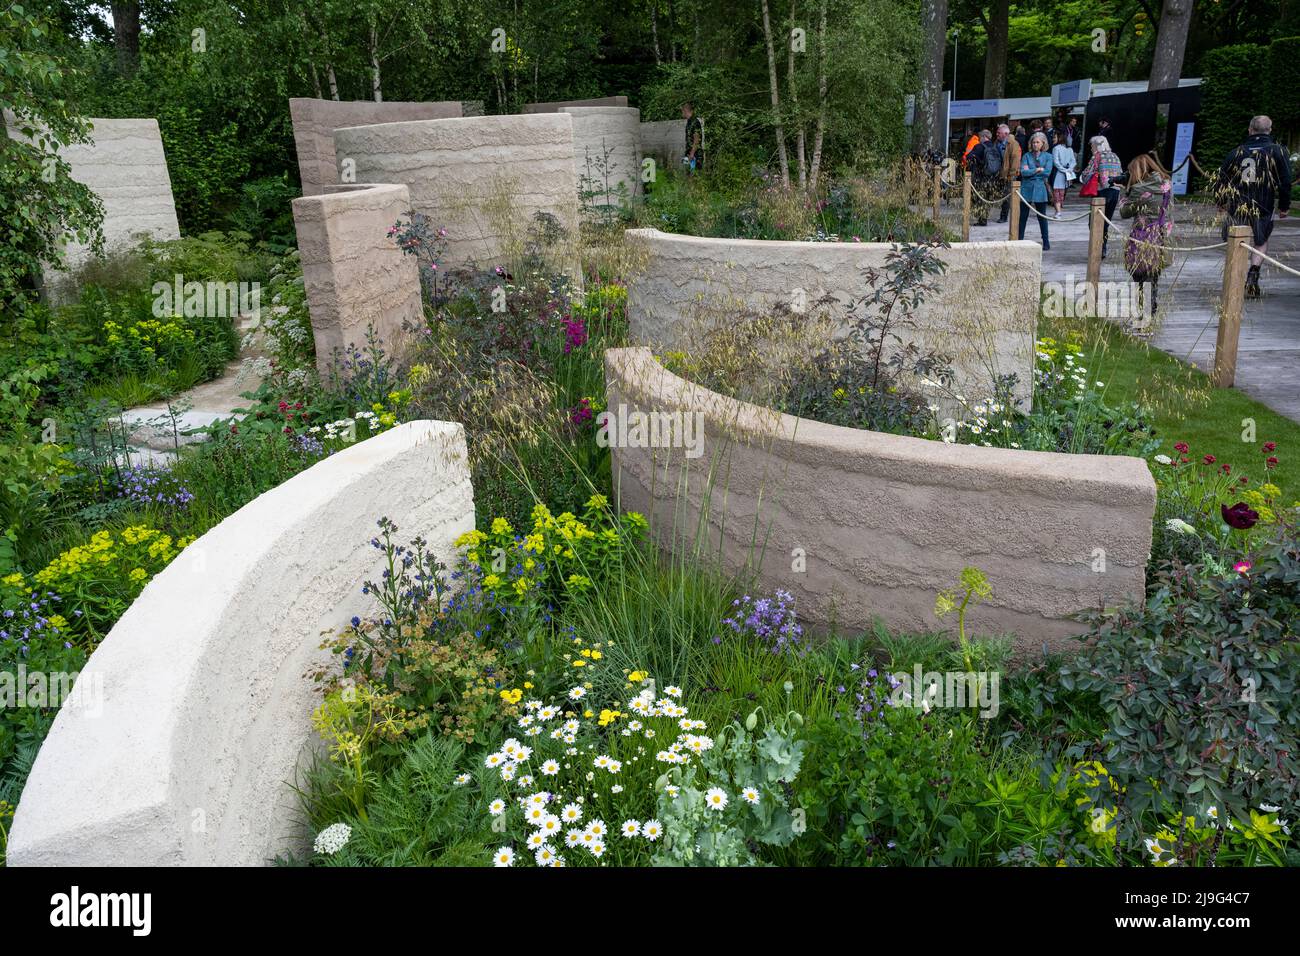 London, UK.  23 May 2022. The Mind Garden at the press day of the RHS Chelsea Flower Show in the grounds of the Royal Hospital Chelsea.  The show runs to 28 May 2022.  Credit: Stephen Chung / Alamy Live News Stock Photo